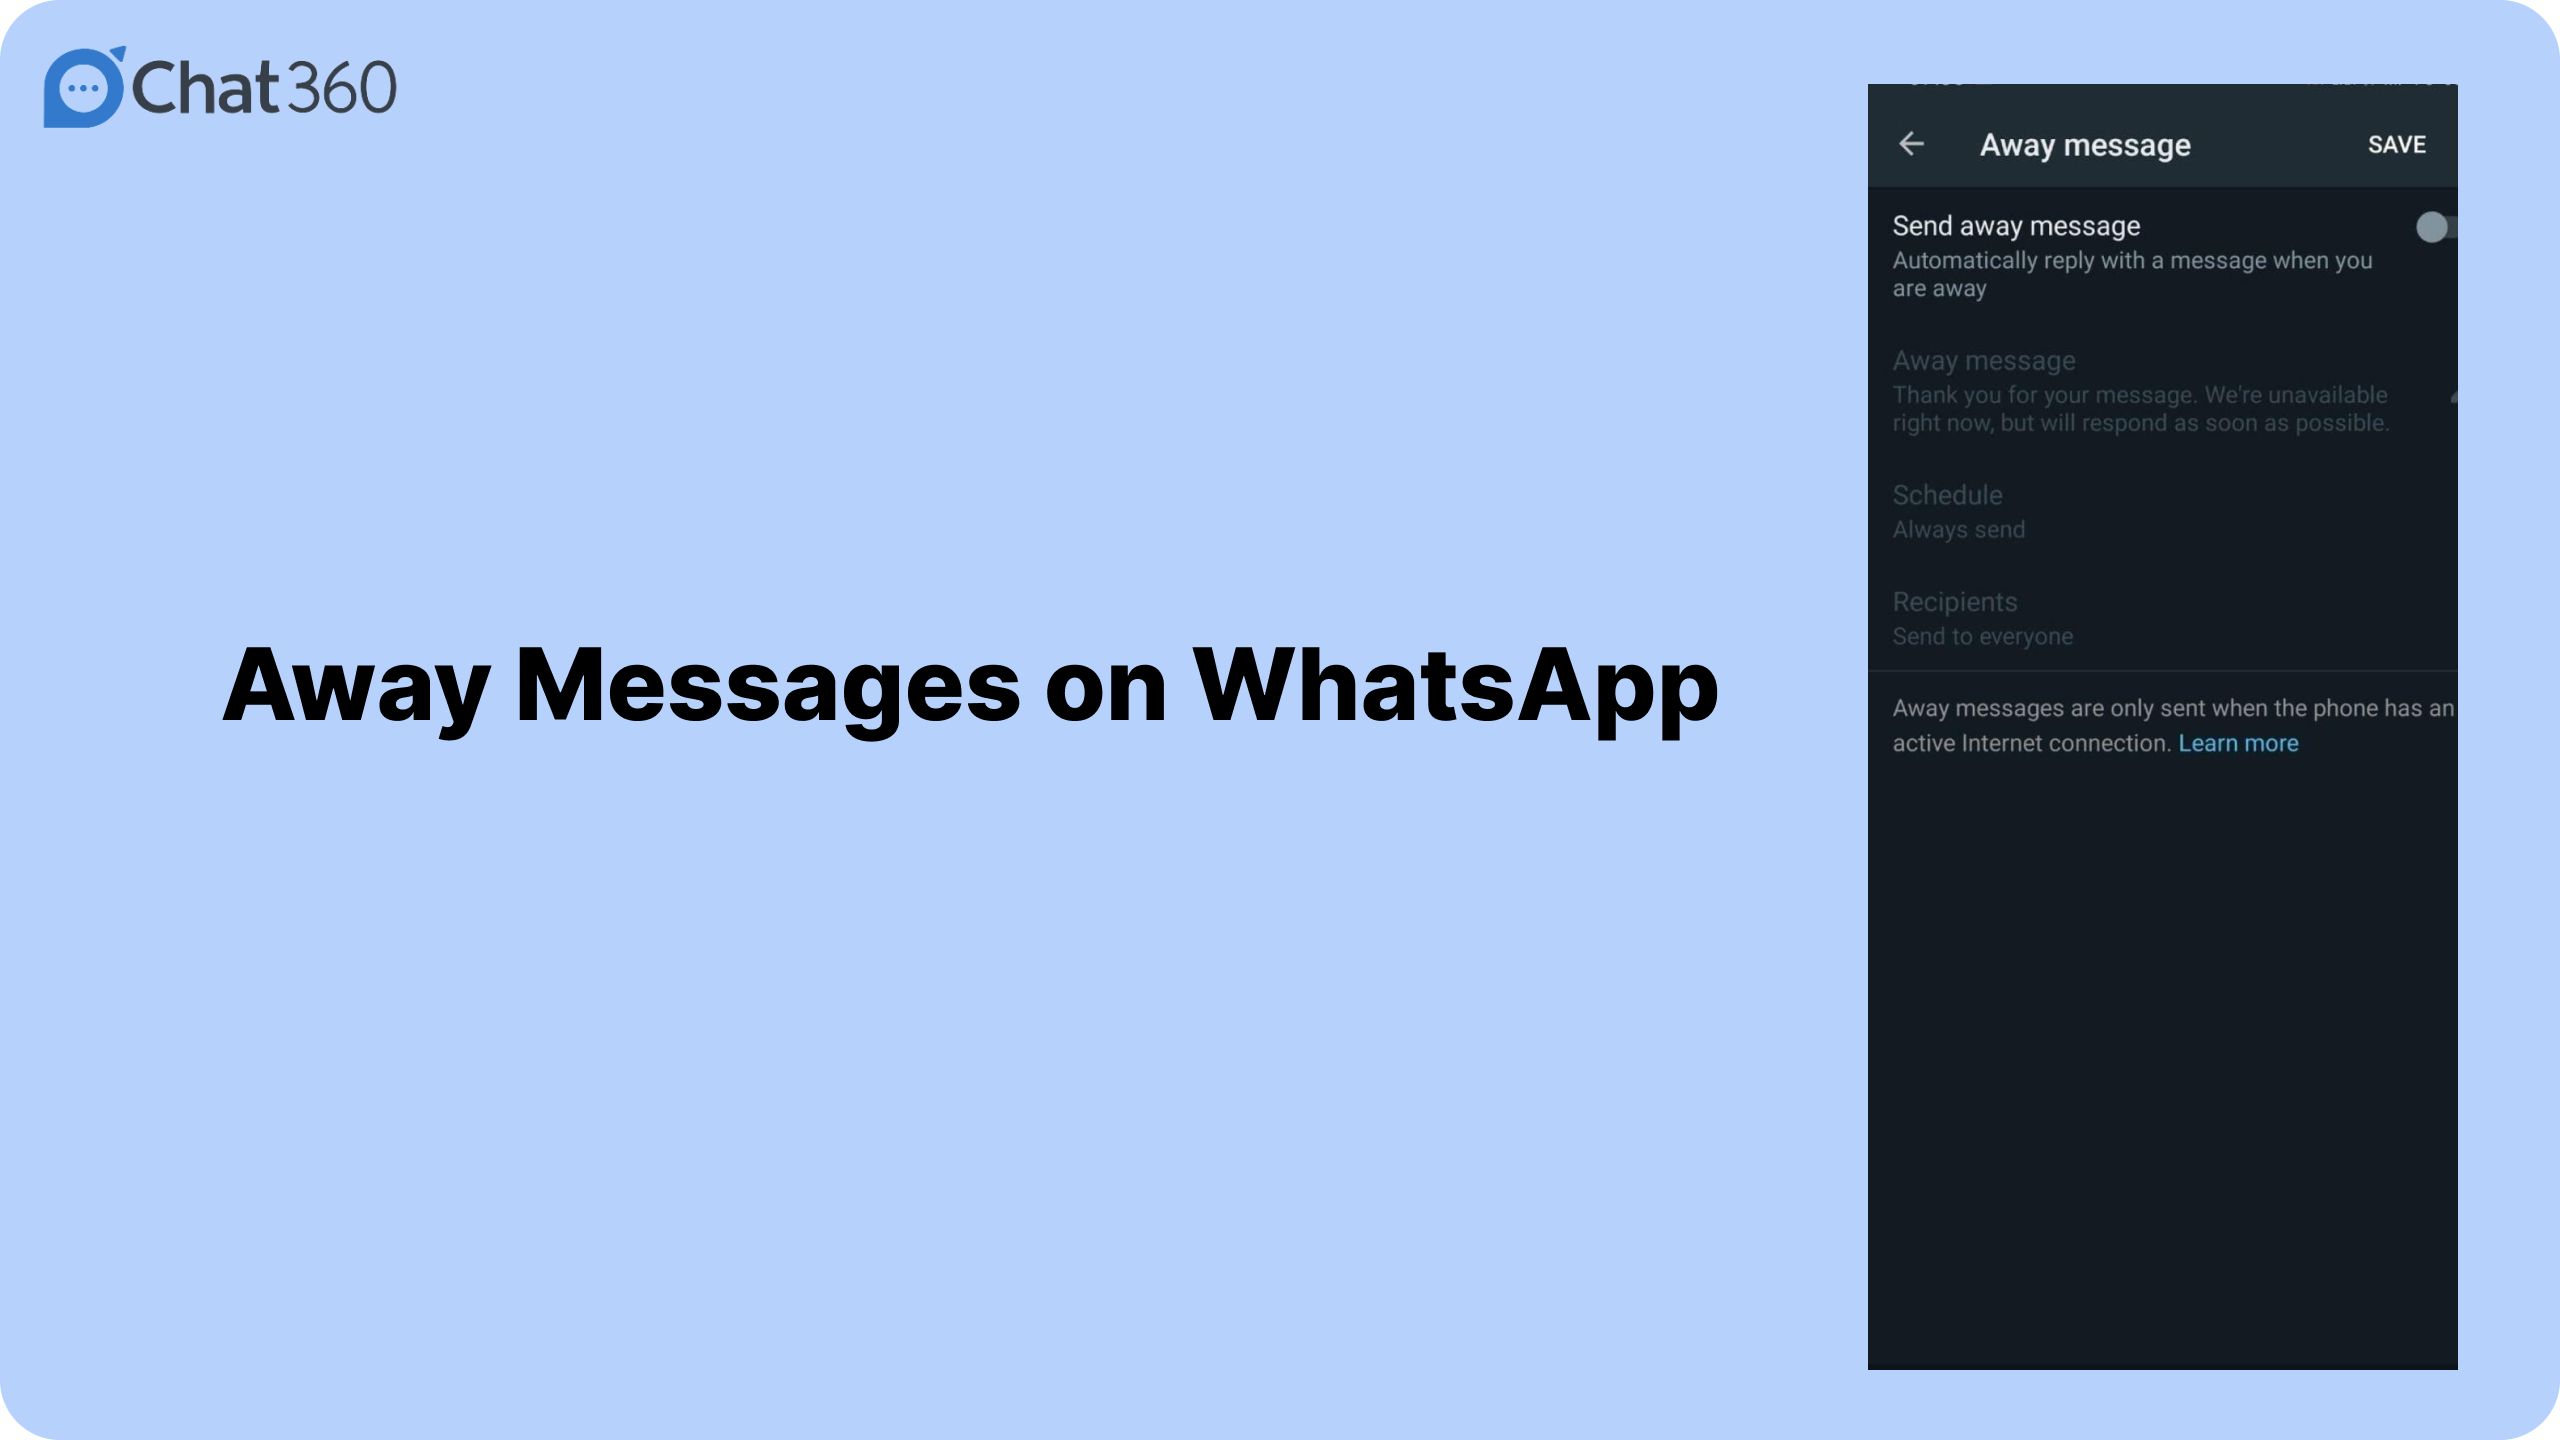 Away Messages on WhatsApp